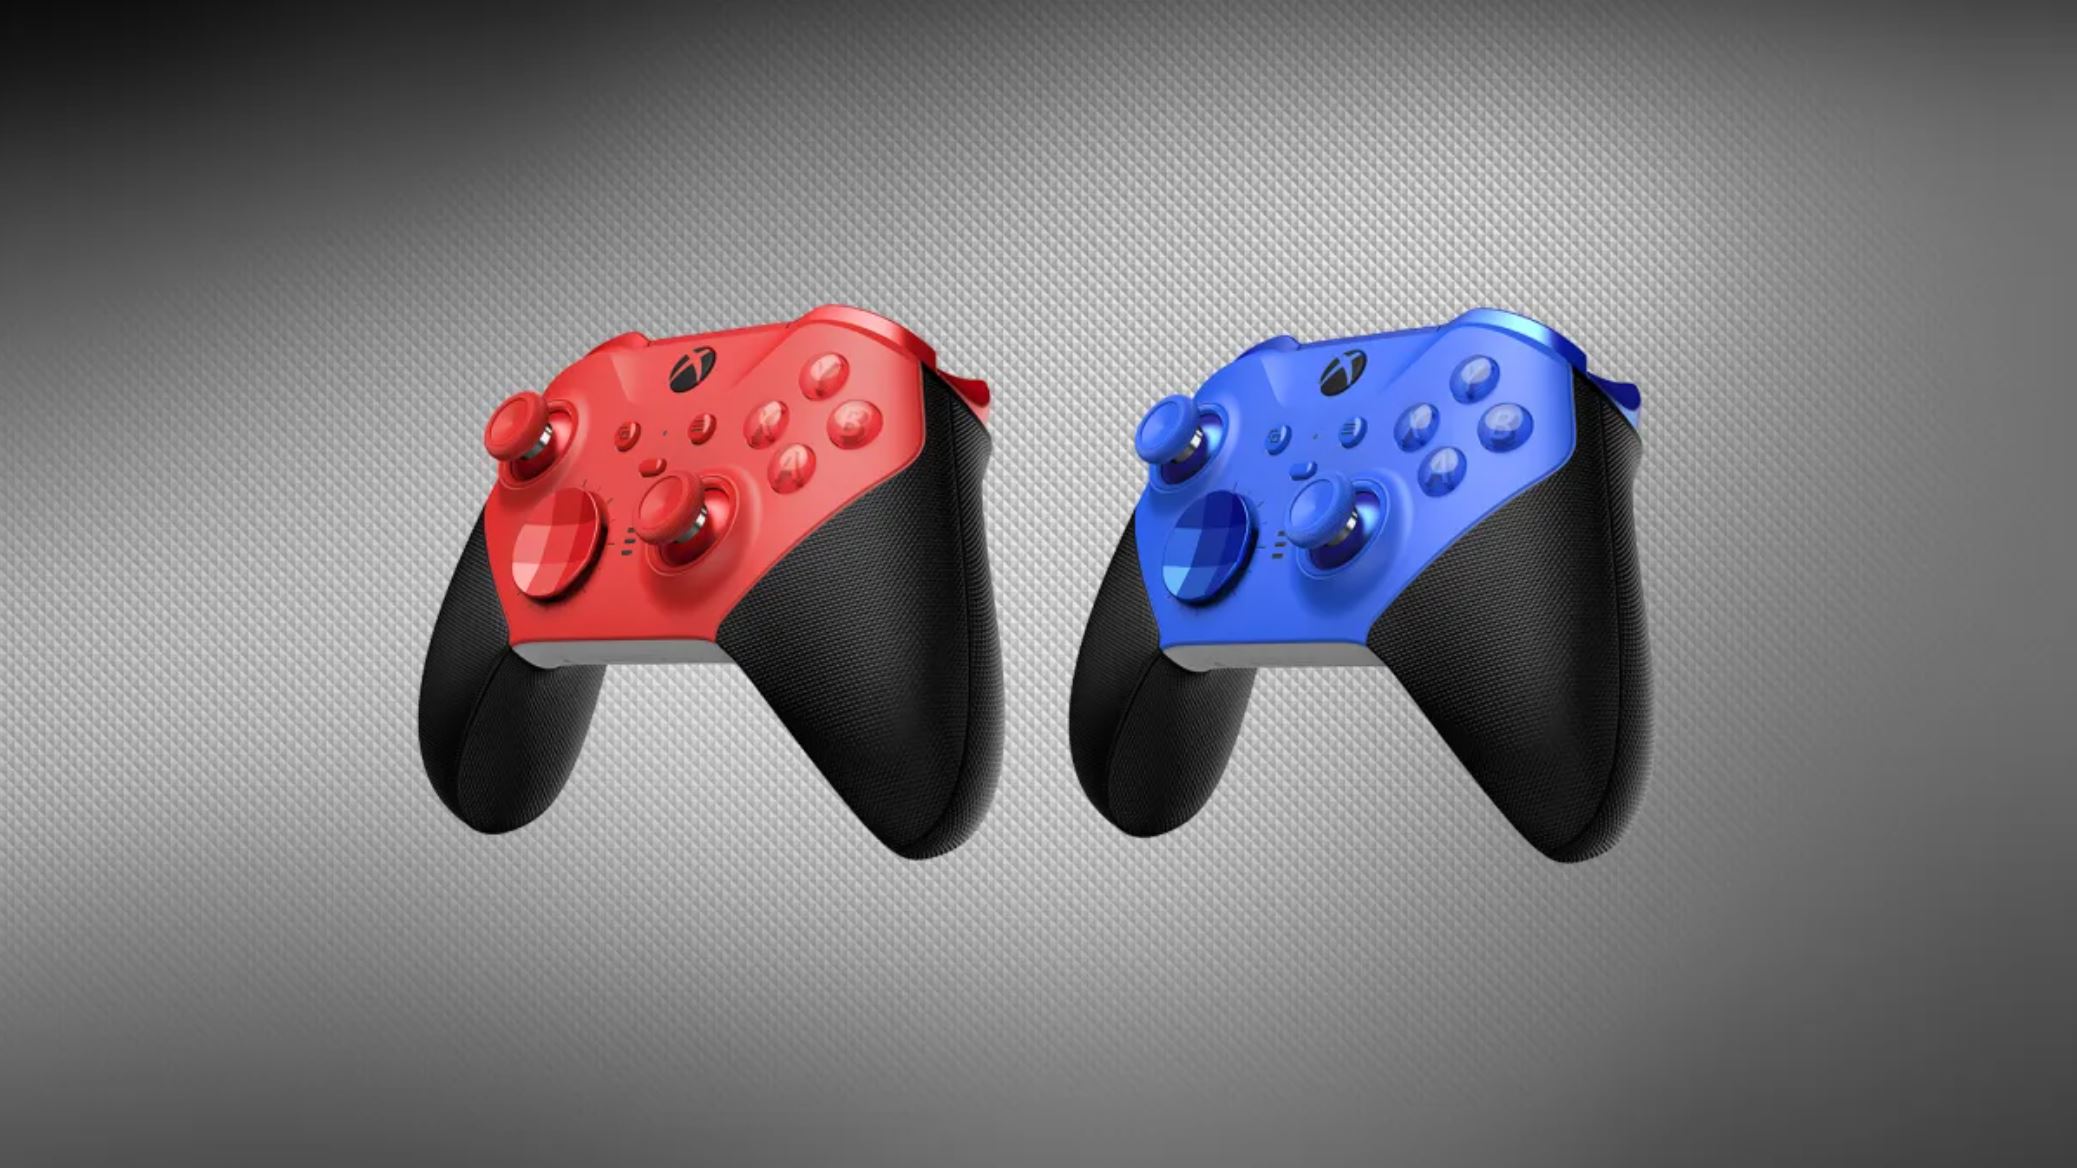 Gear up like the pros with the new Xbox Elite Series 2 Wireless Controller – Core in Red or Blue